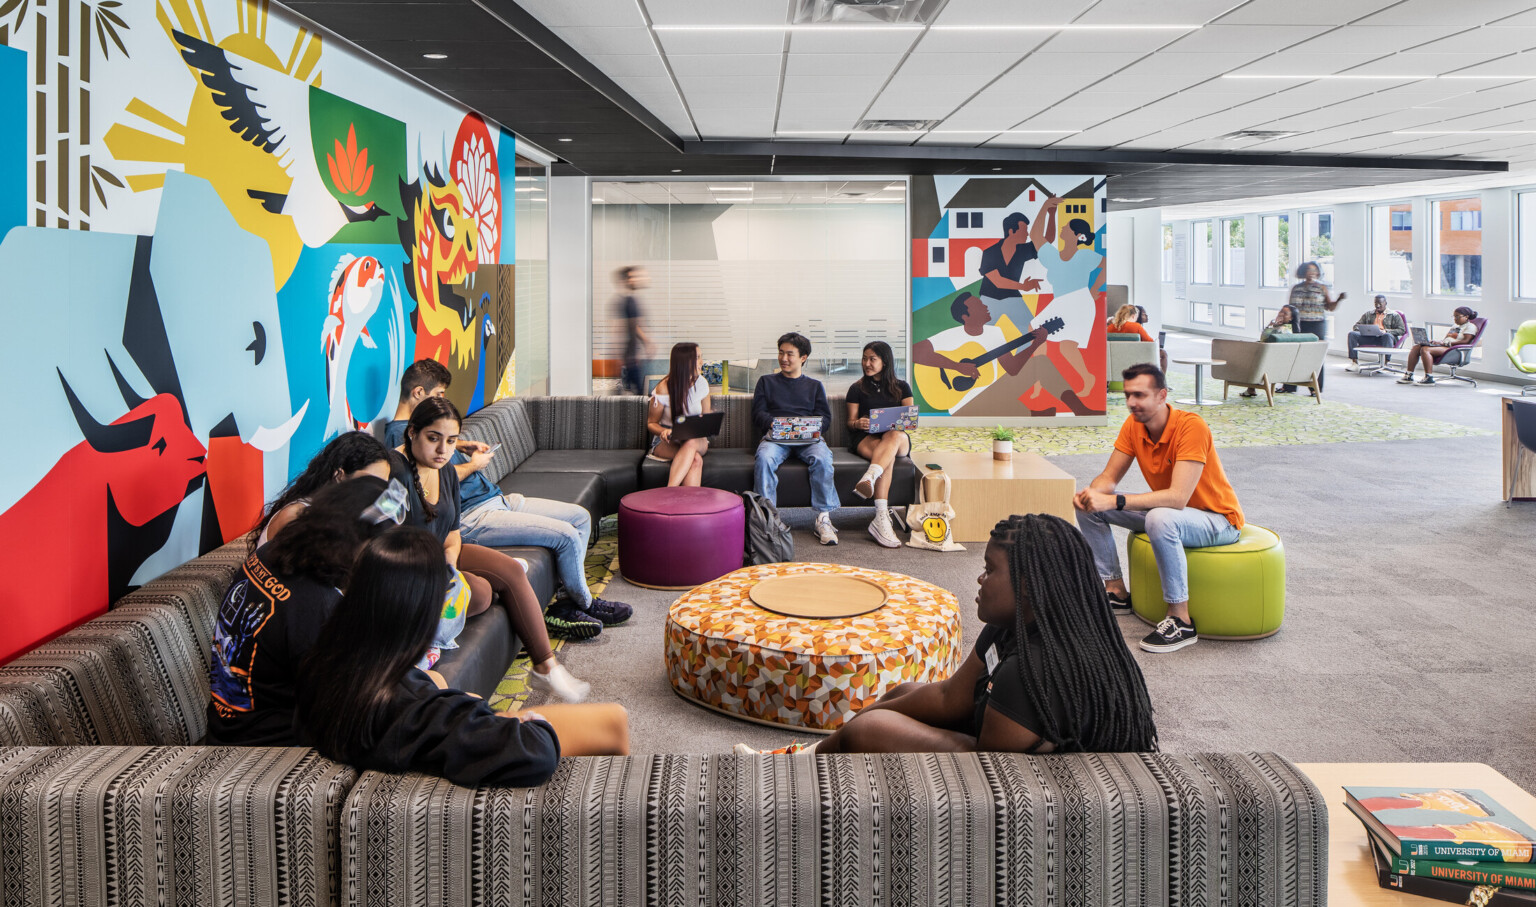 Students engaging in conversation on couches at the Whitten University Center on the University of Miami campus.